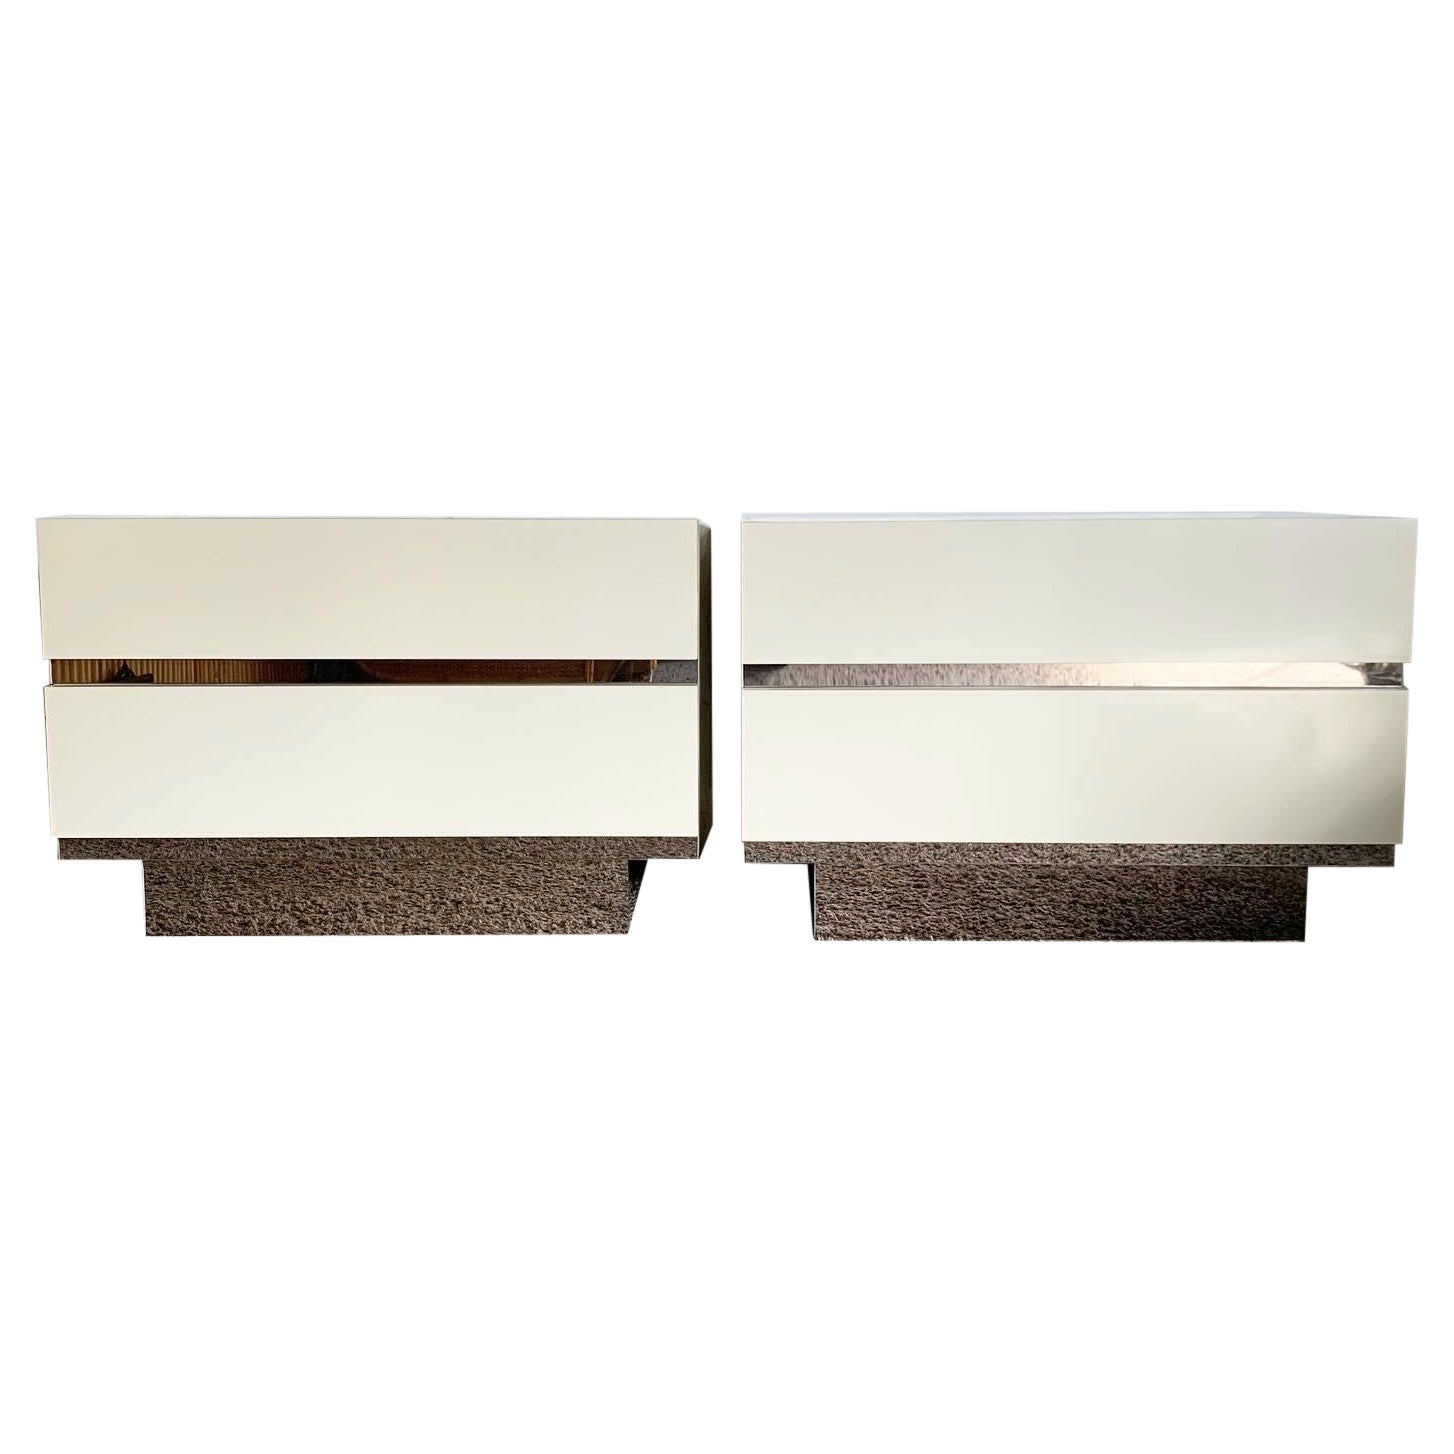 Postmodern Cream Lacquer Laminate With Glass Mirror Paneling - a Pair For Sale